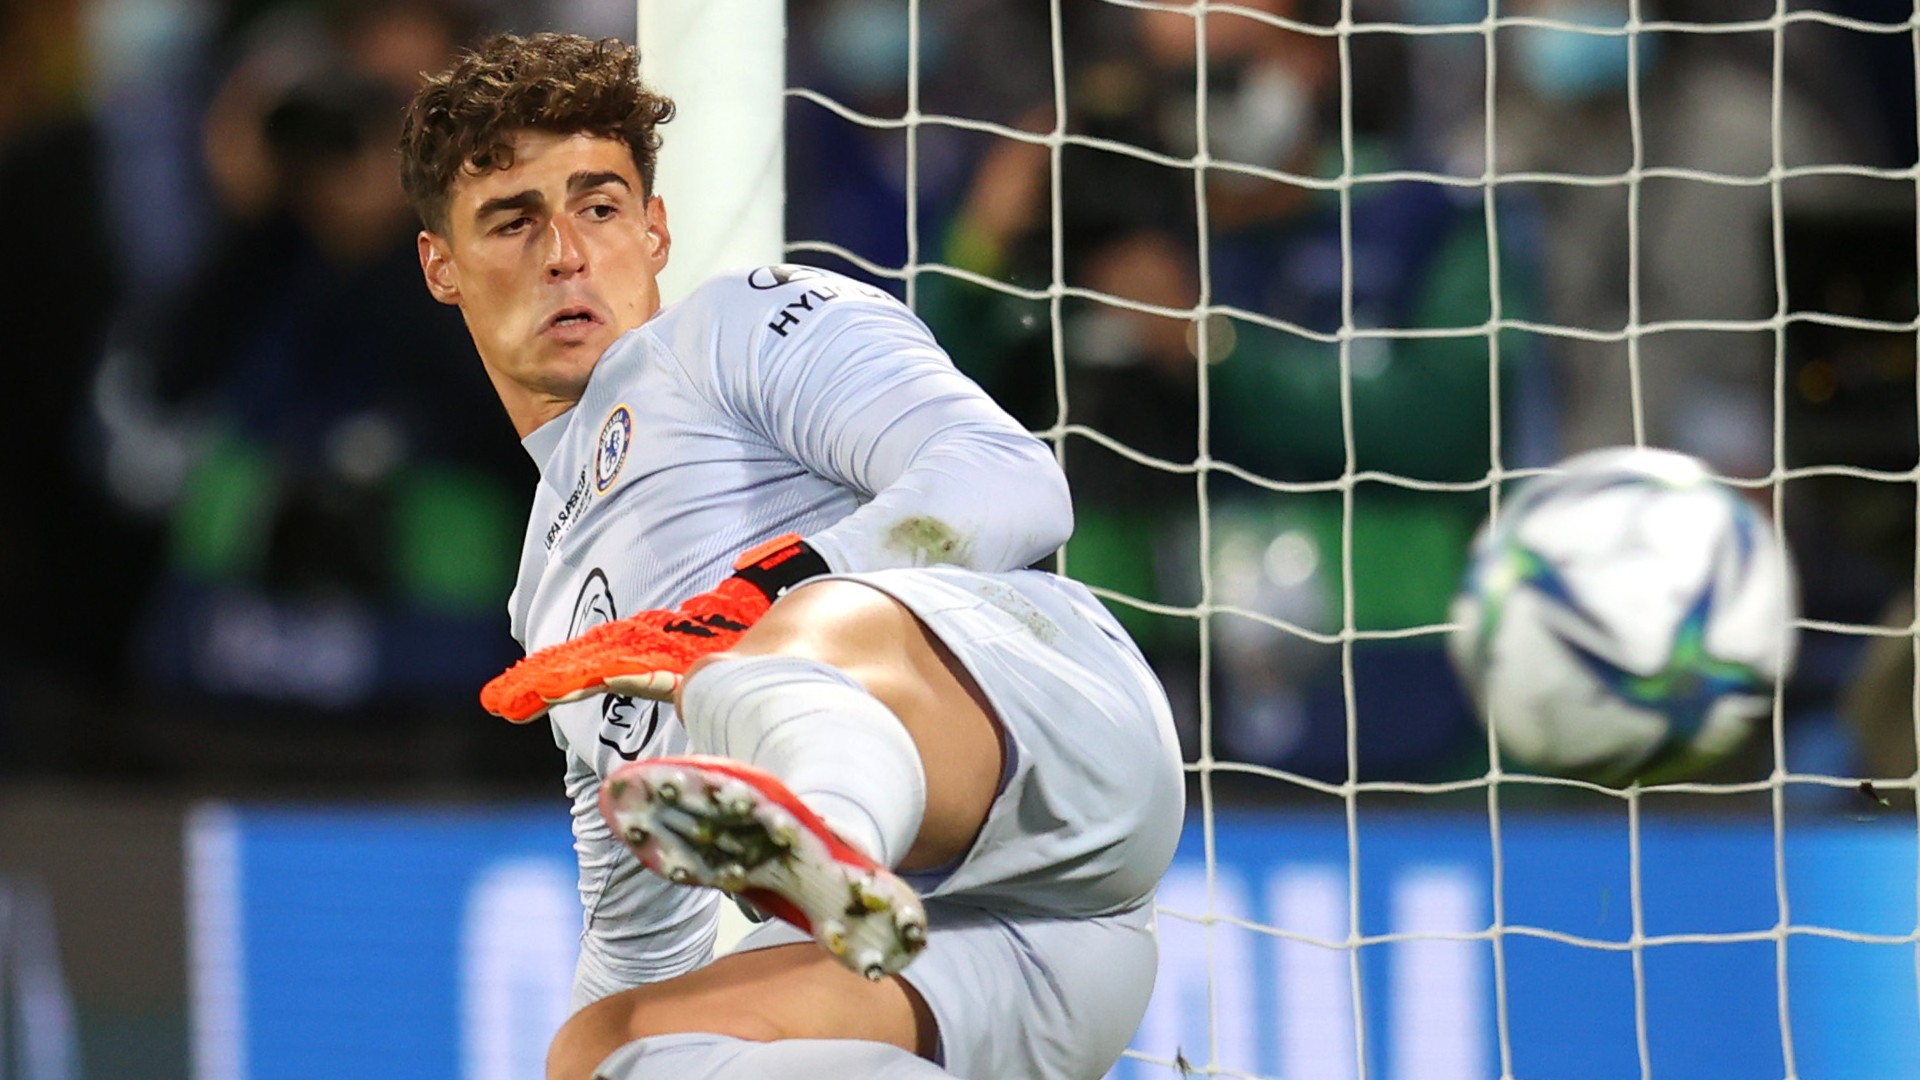 Mendy was happy to make way for Kepa in UEFA Super Cup penalty shootout, says Chelsea boss Tuchel